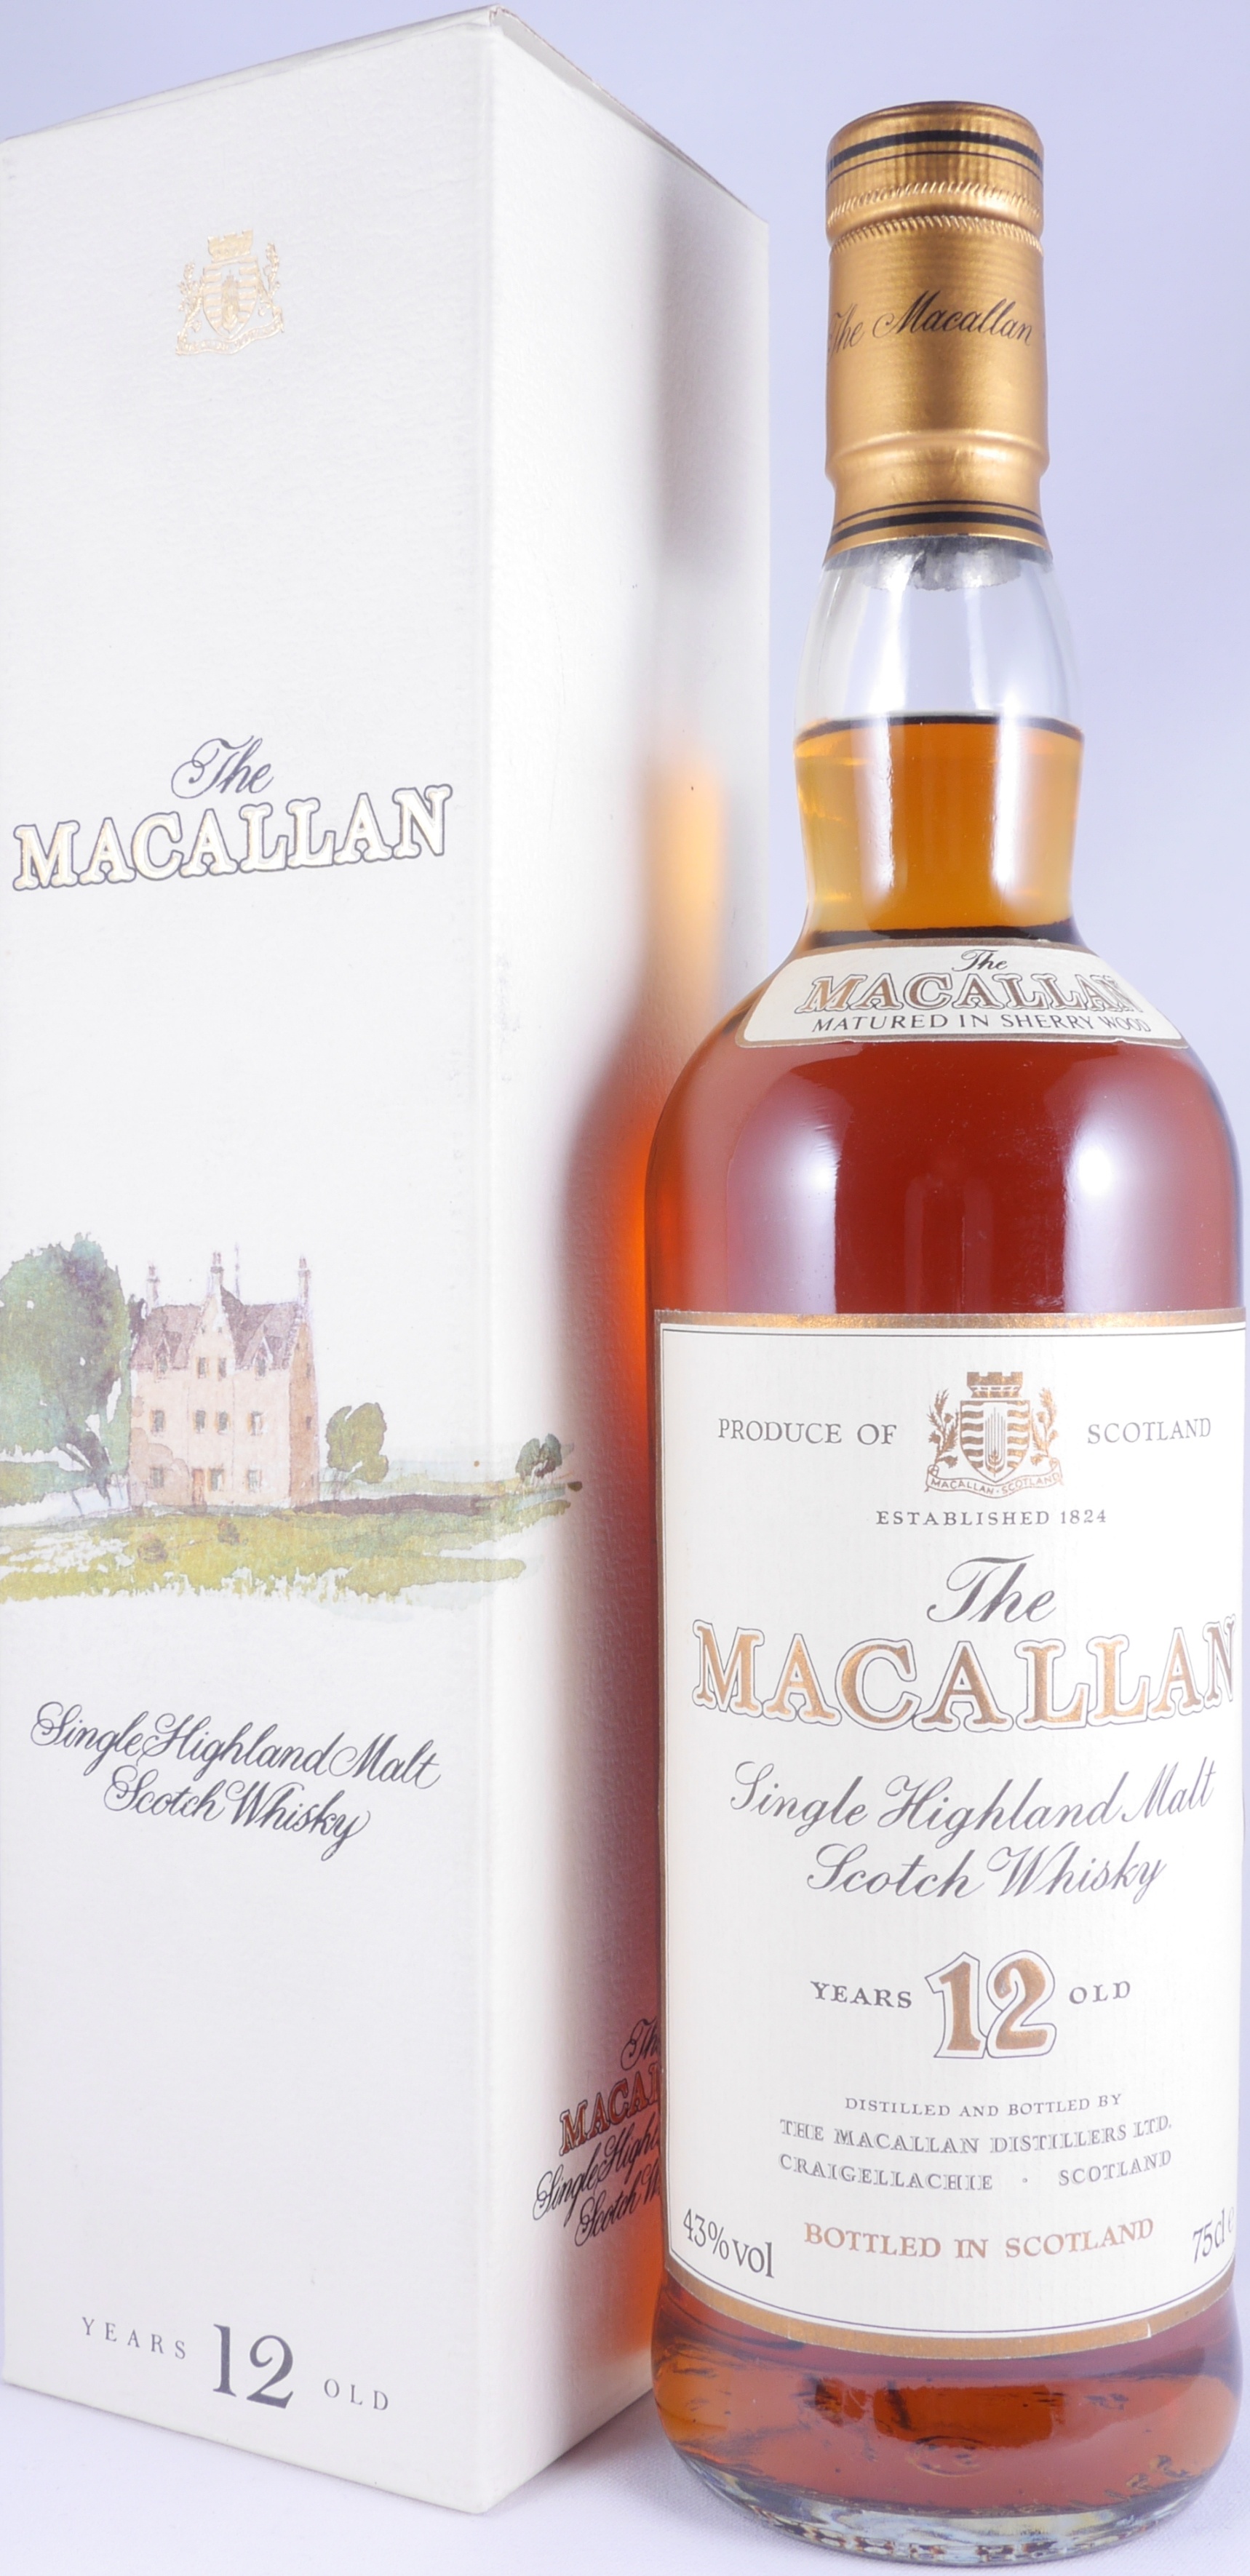 Buy Macallan 12 Years Sherry Wood Highland Single Malt Scotch Whisky 43 0 Vol Rare Old Bottling From The 70s For Jumac Gmbh Bonn At Amcom Secure Online